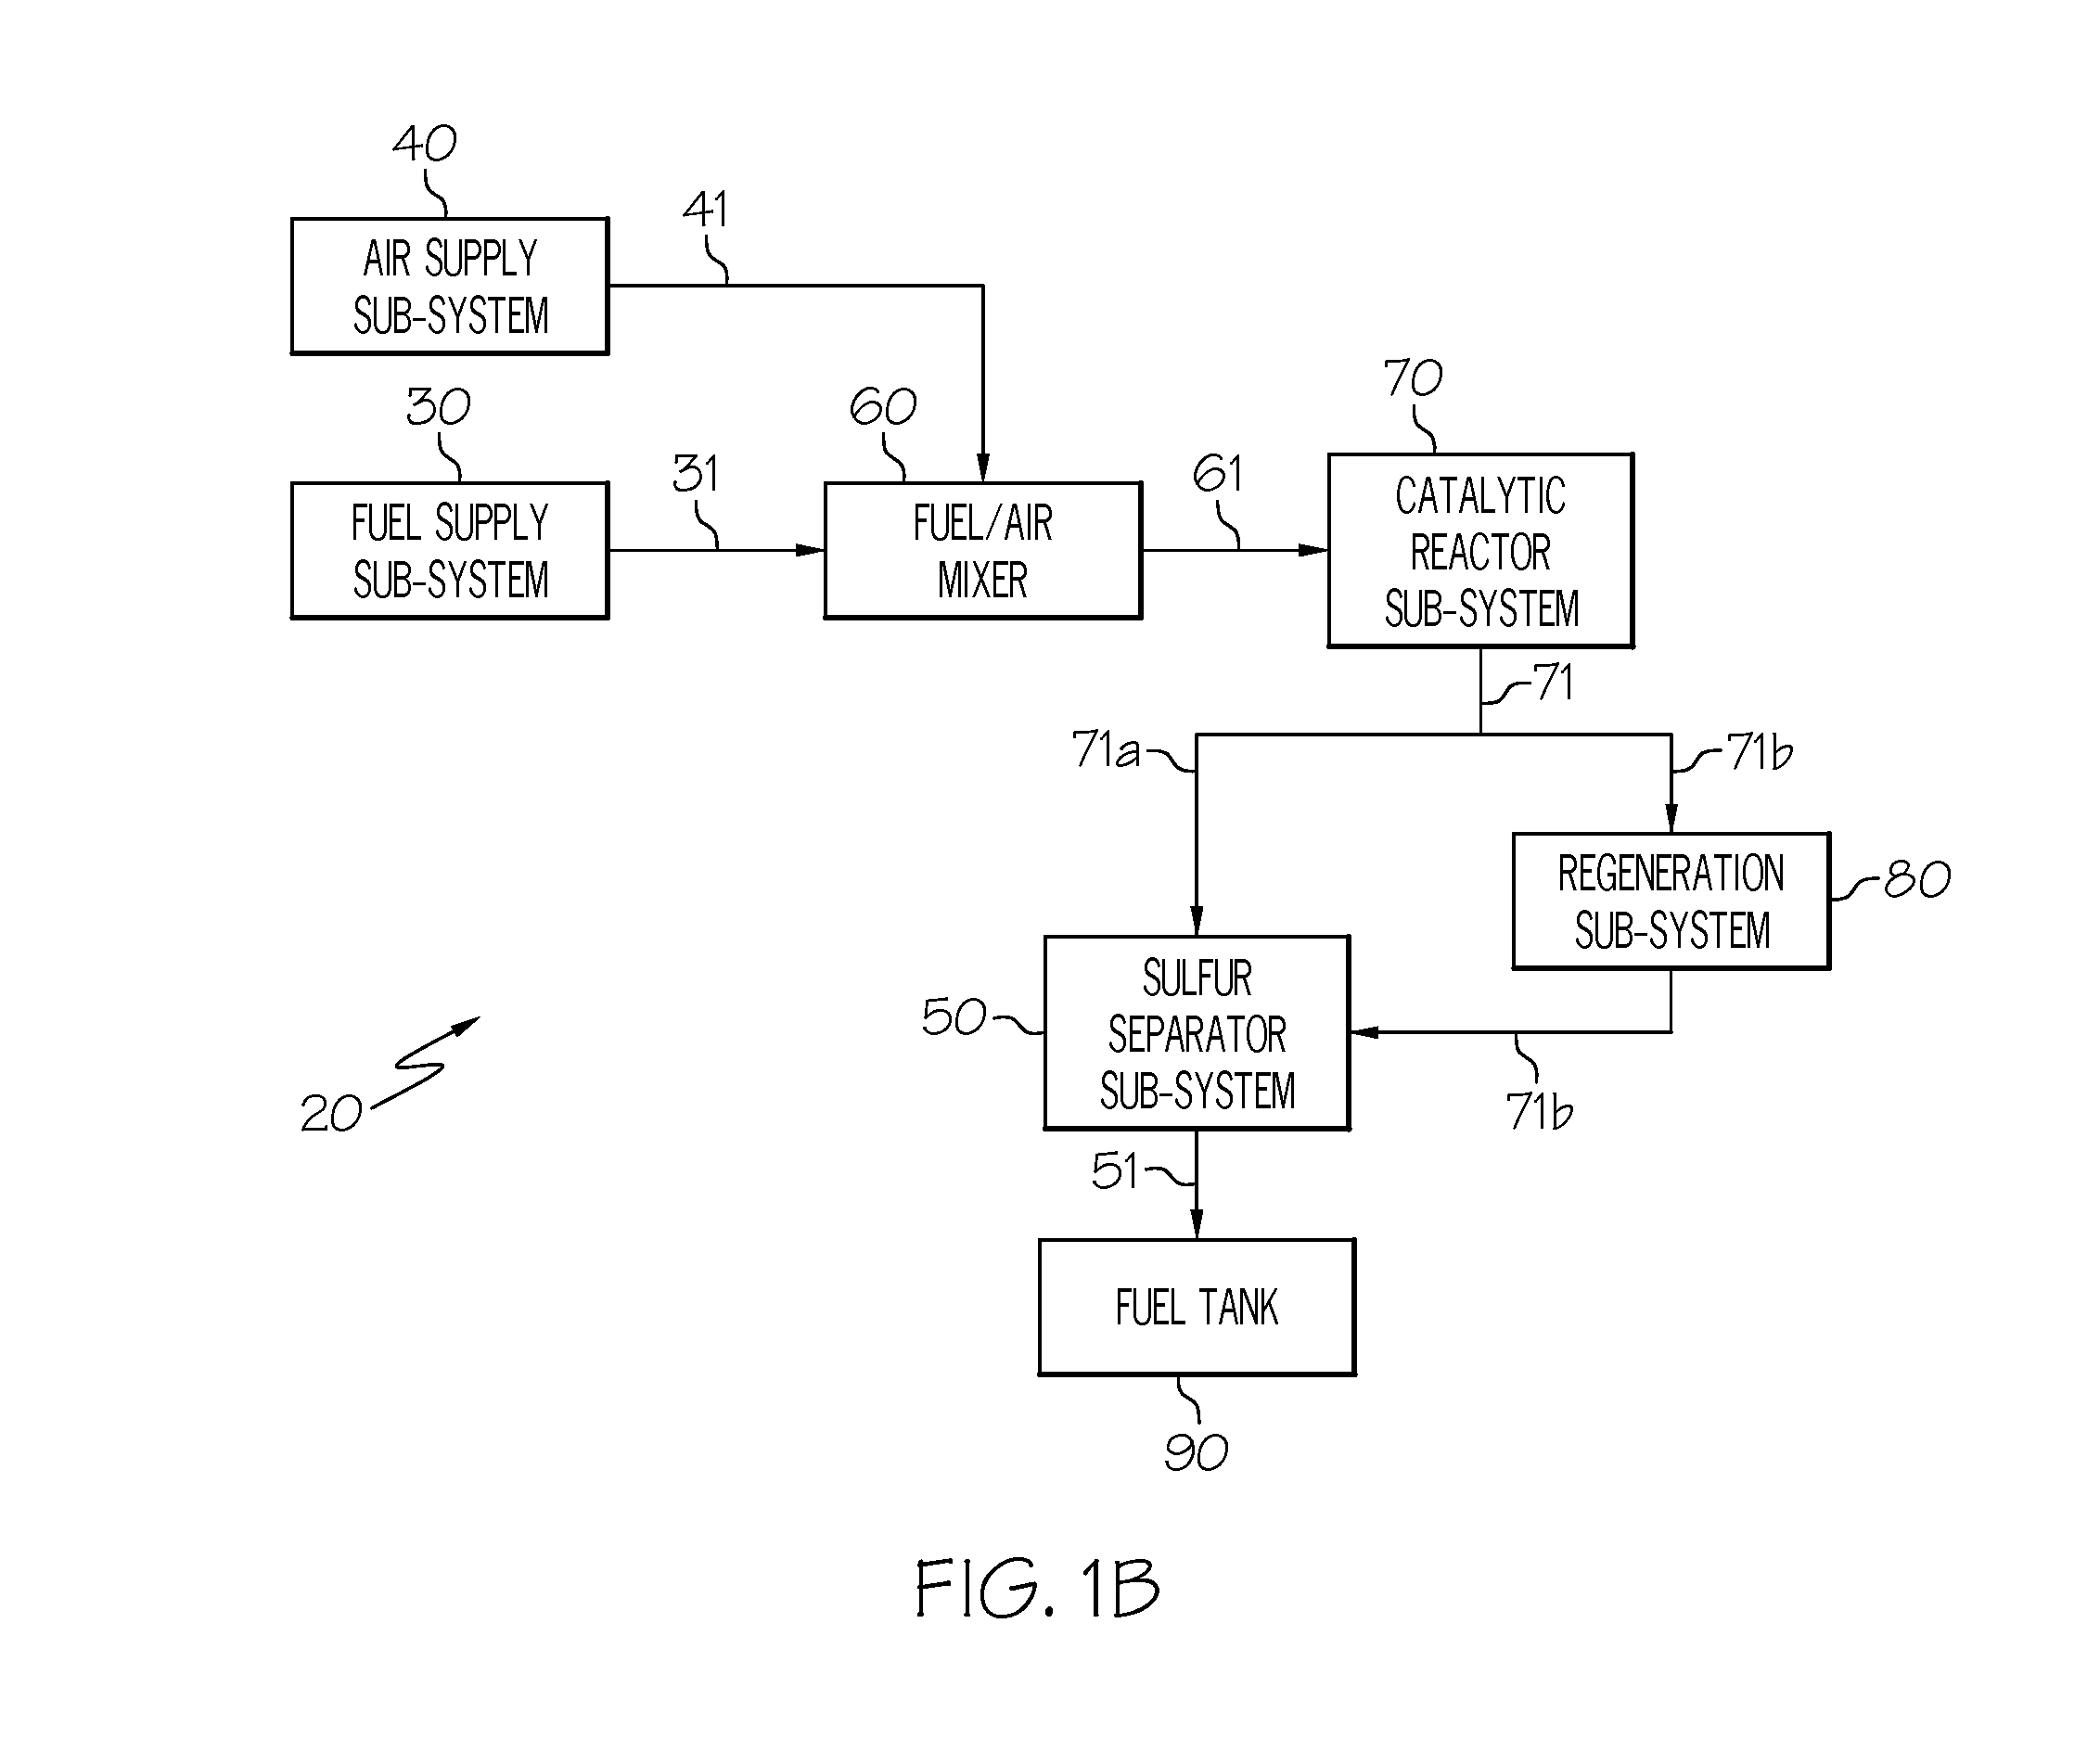 Advanced carbon dioxide fuel tank inerting system with desulfurization